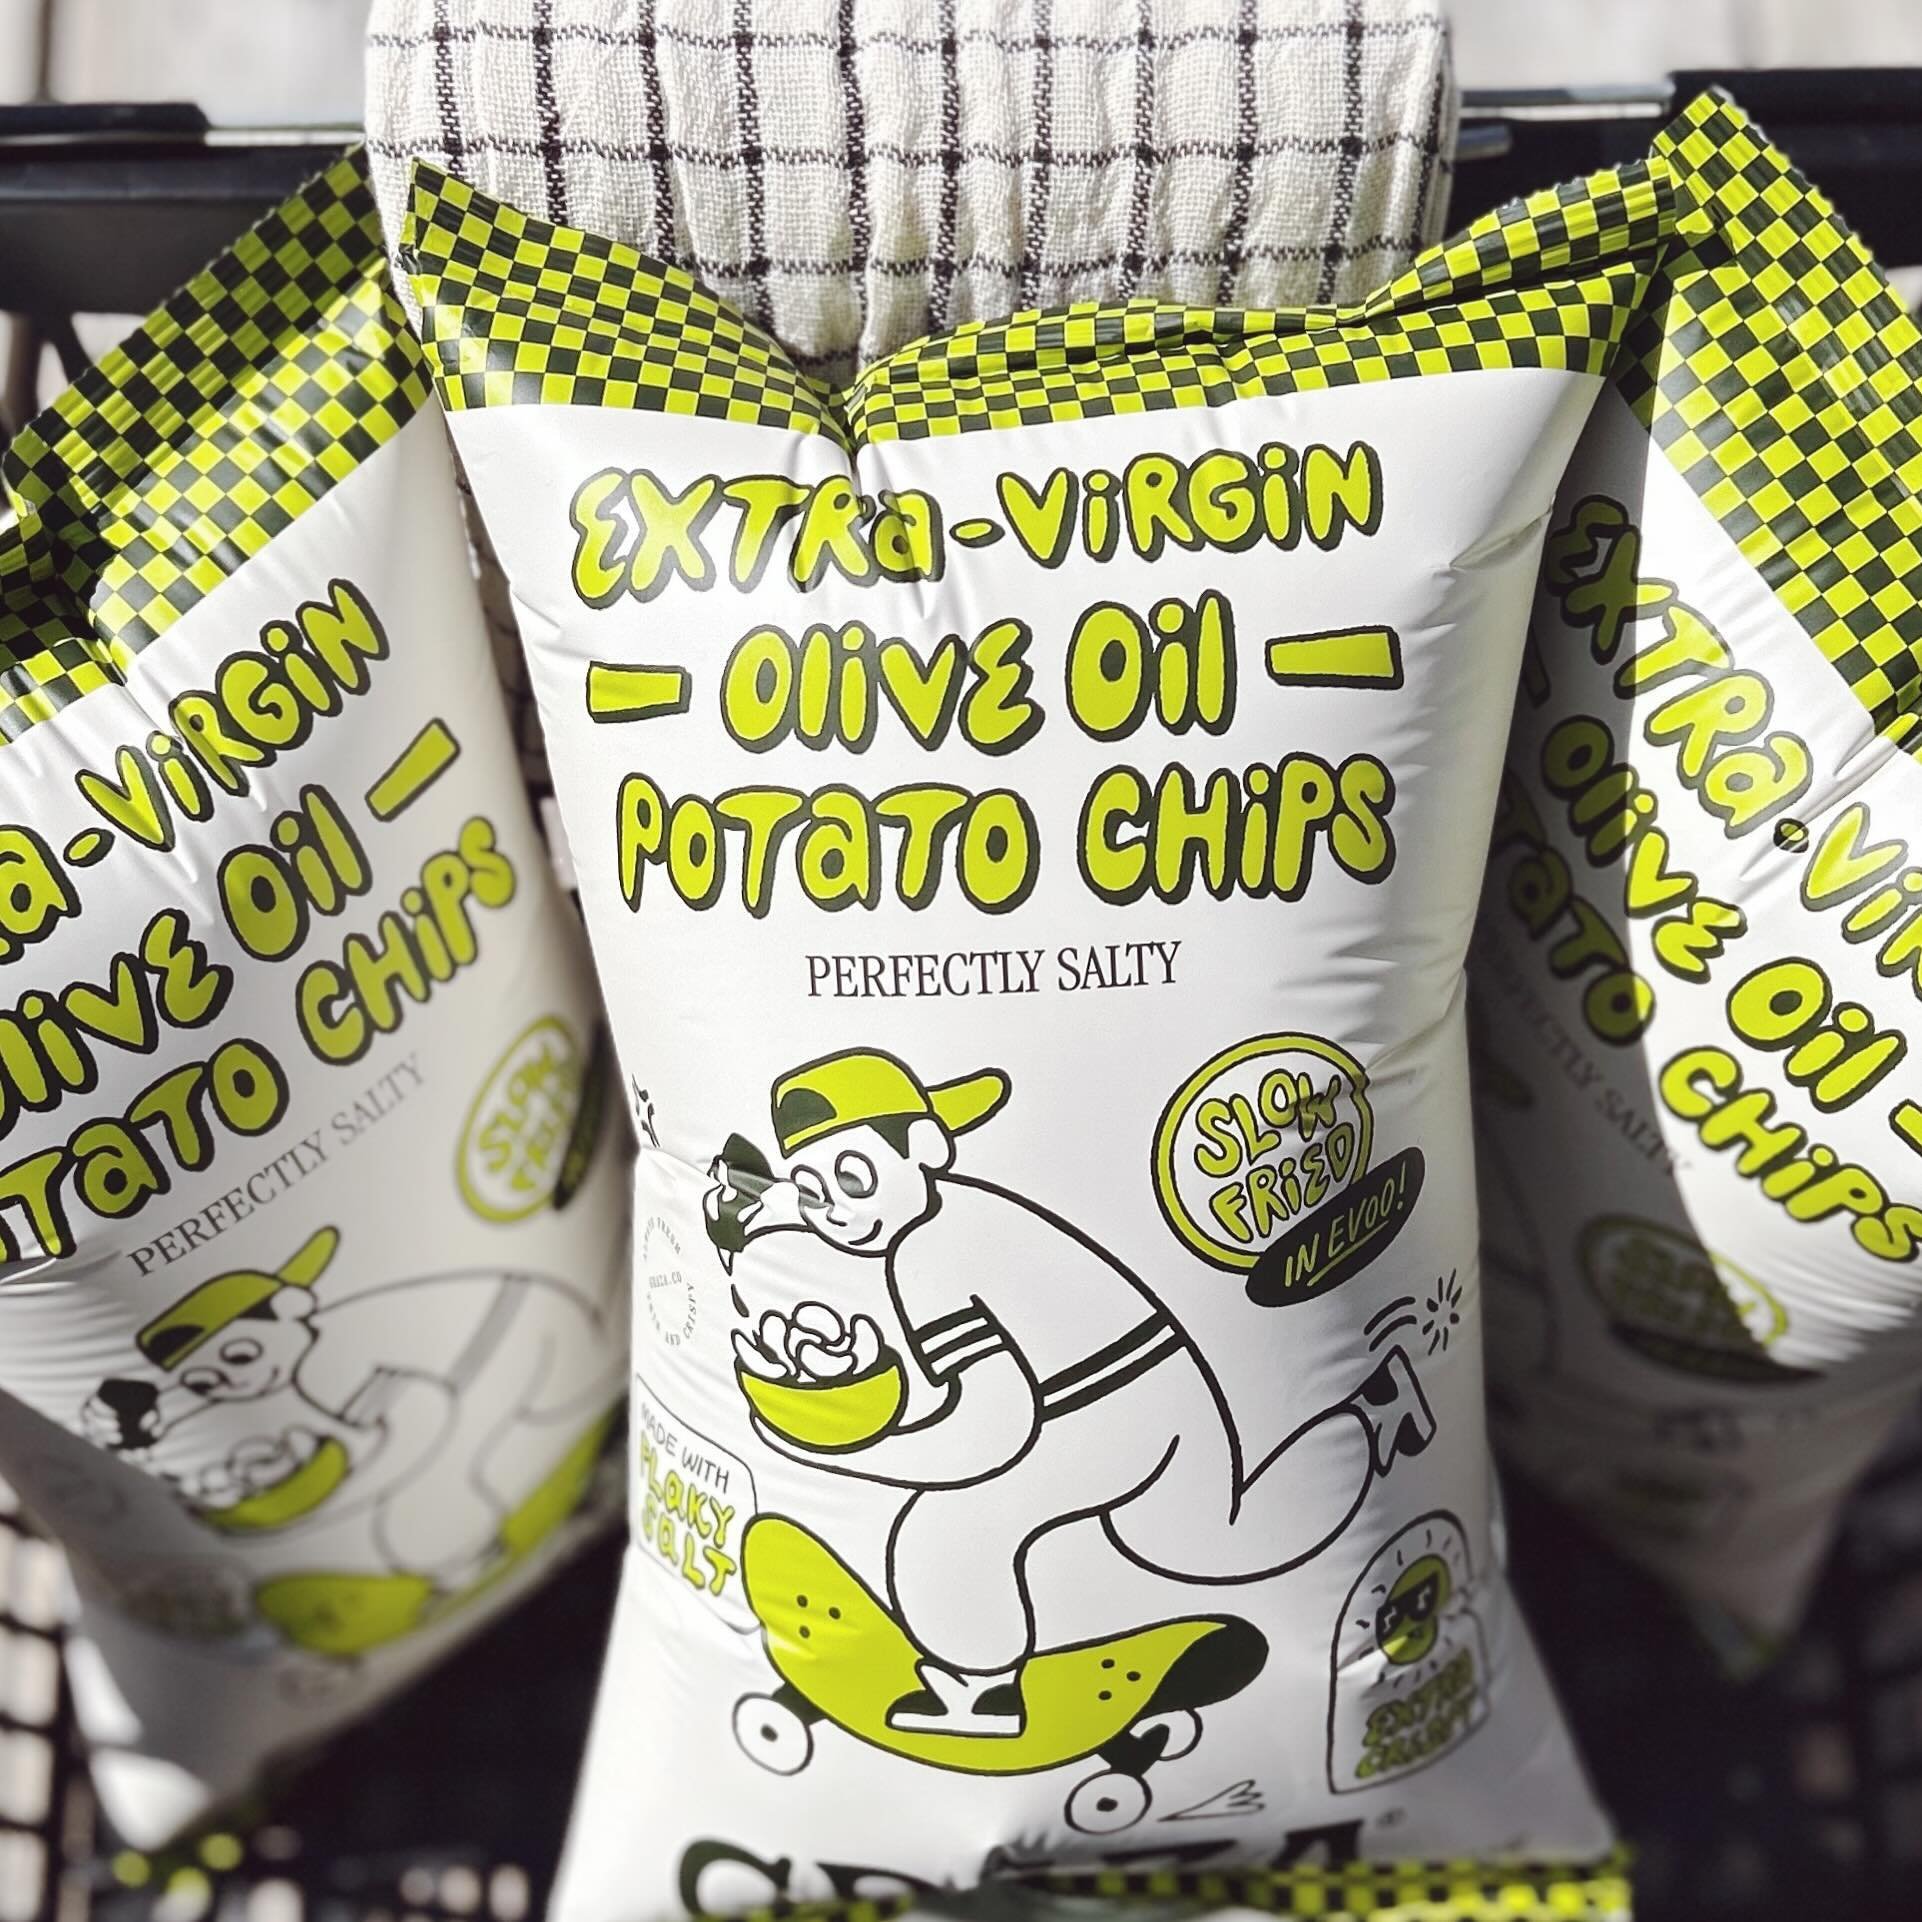 ICYMI: These limited edition @getgraza EVOO potato chips hit the SNACKPOT. They won&rsquo;t be here for long- so get &lsquo;em before they&rsquo;re gone!